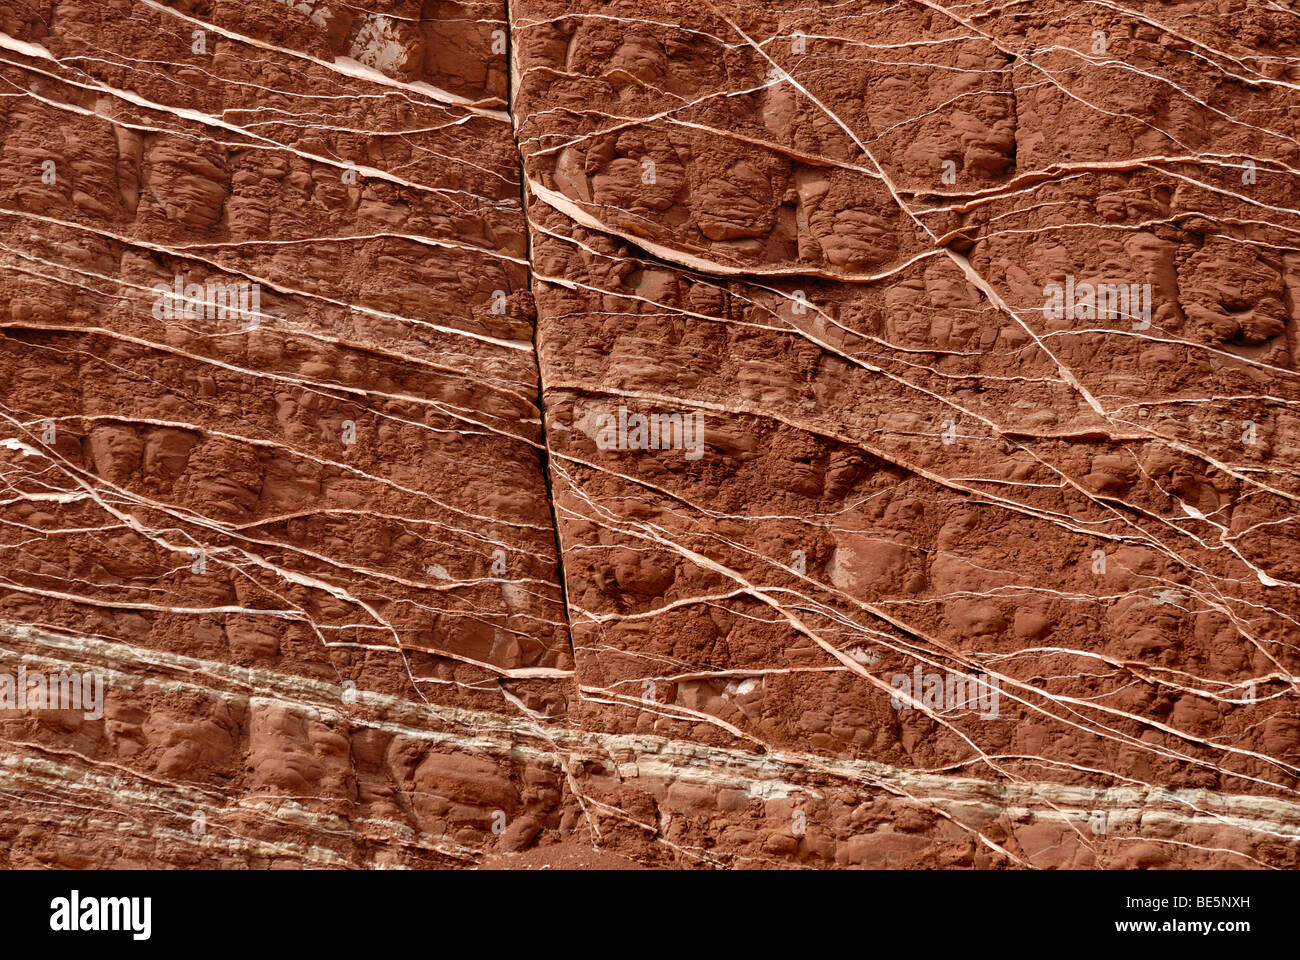 Red-brown sandstone with quartz deposits, Capitol Reef National Park, Utah, USA Stock Photo